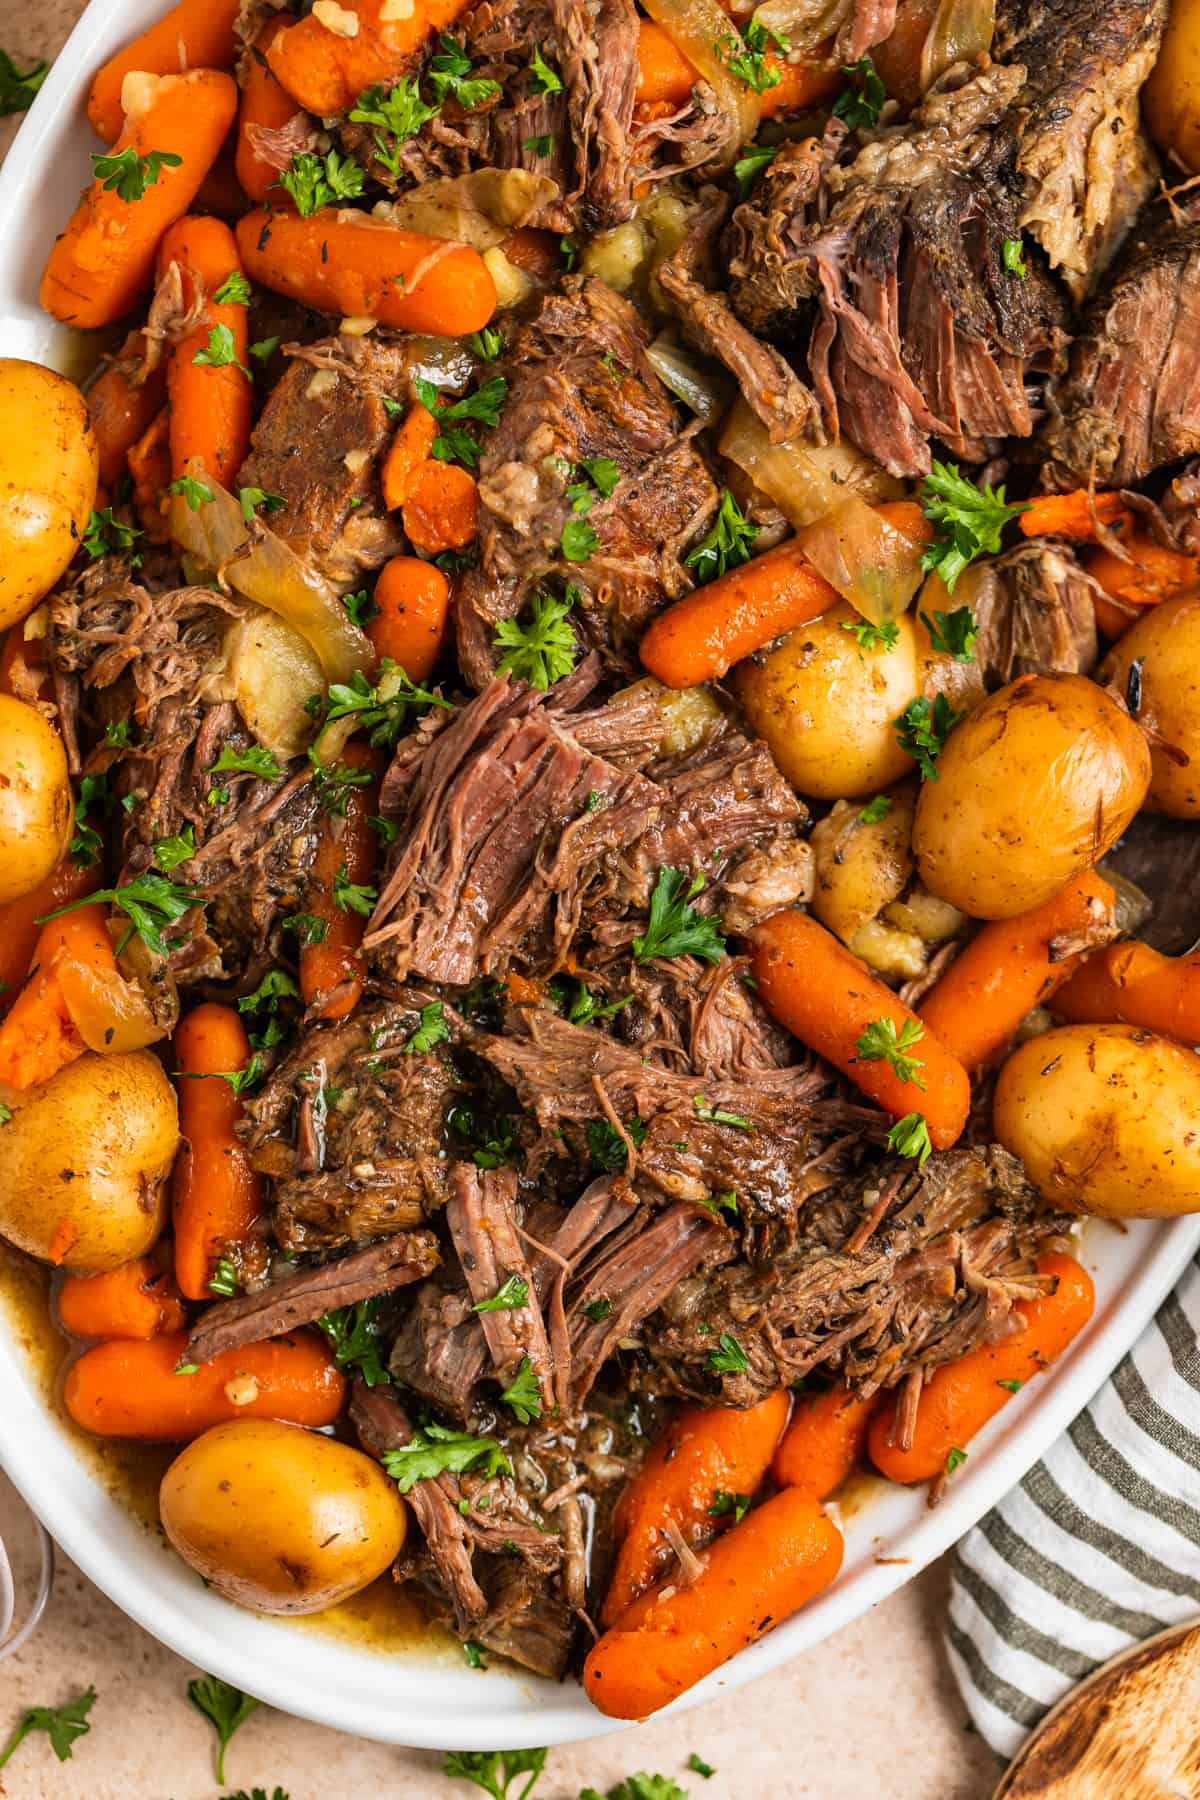 Overhead view of white platter with shredded chuck roast, carrots, potatoes and onion.